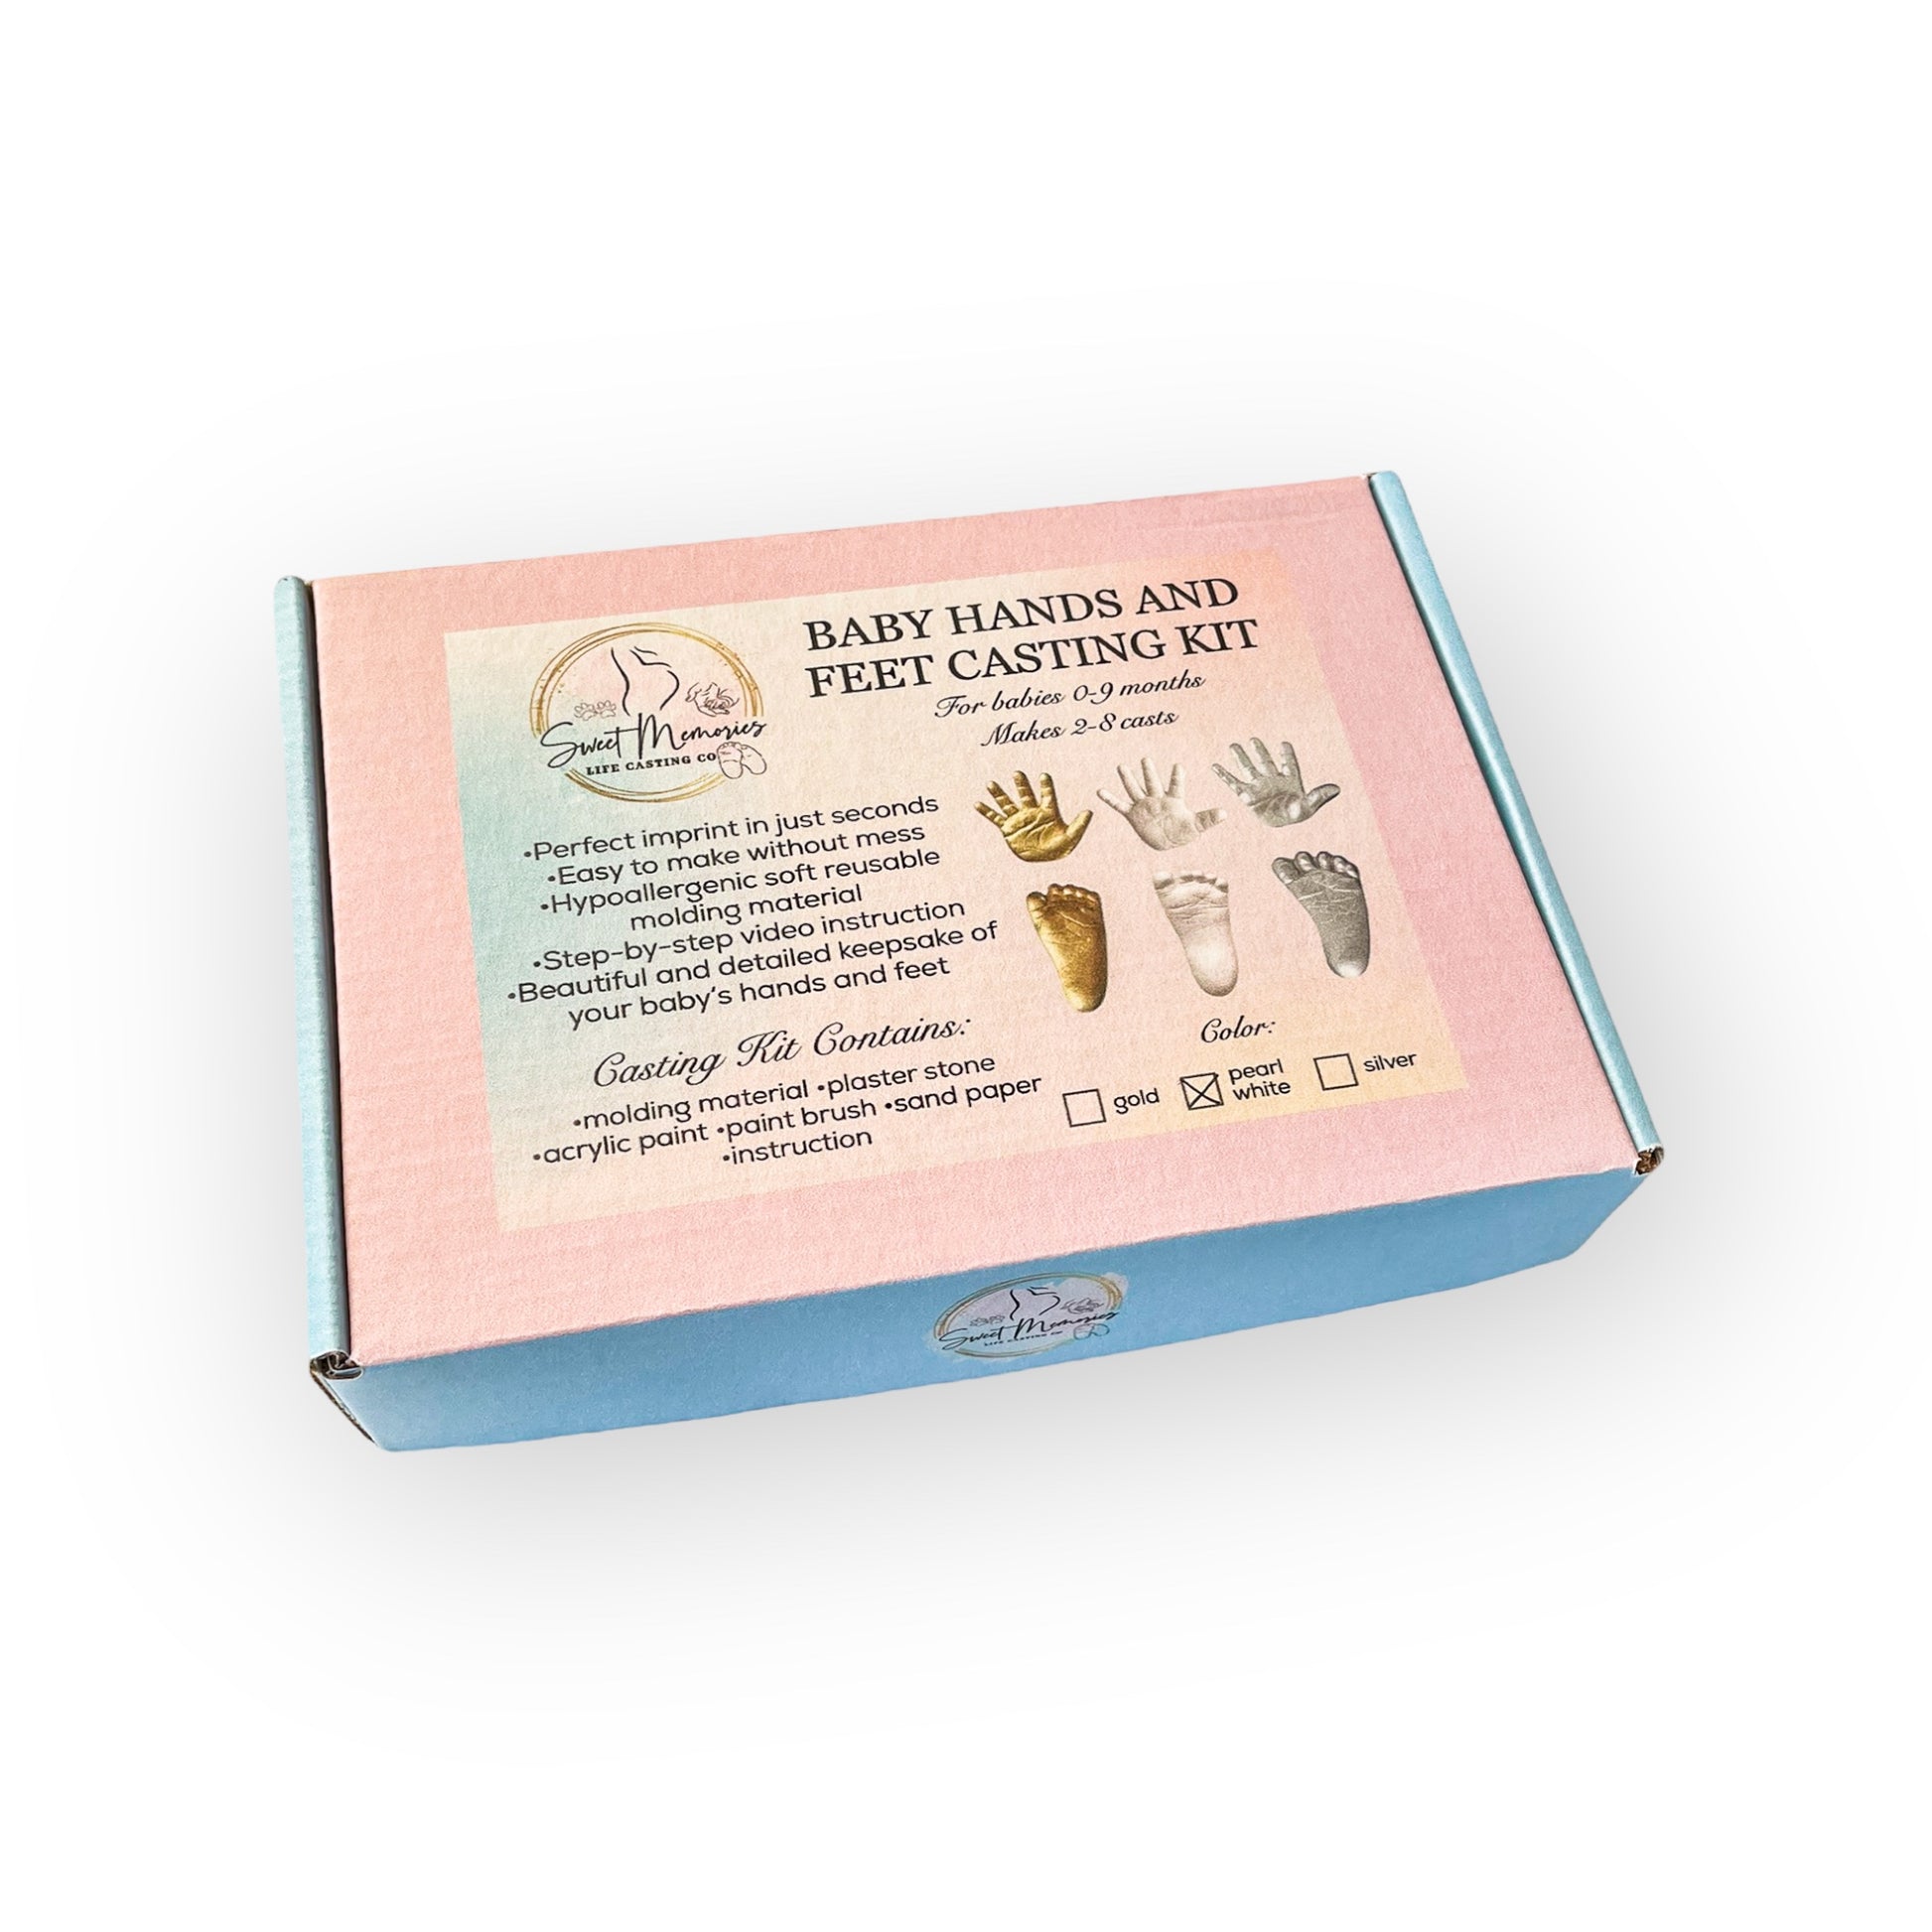 Sweet Memories baby hands and feet casting kit for babies 0-9 months old,  makes 2-8 casts